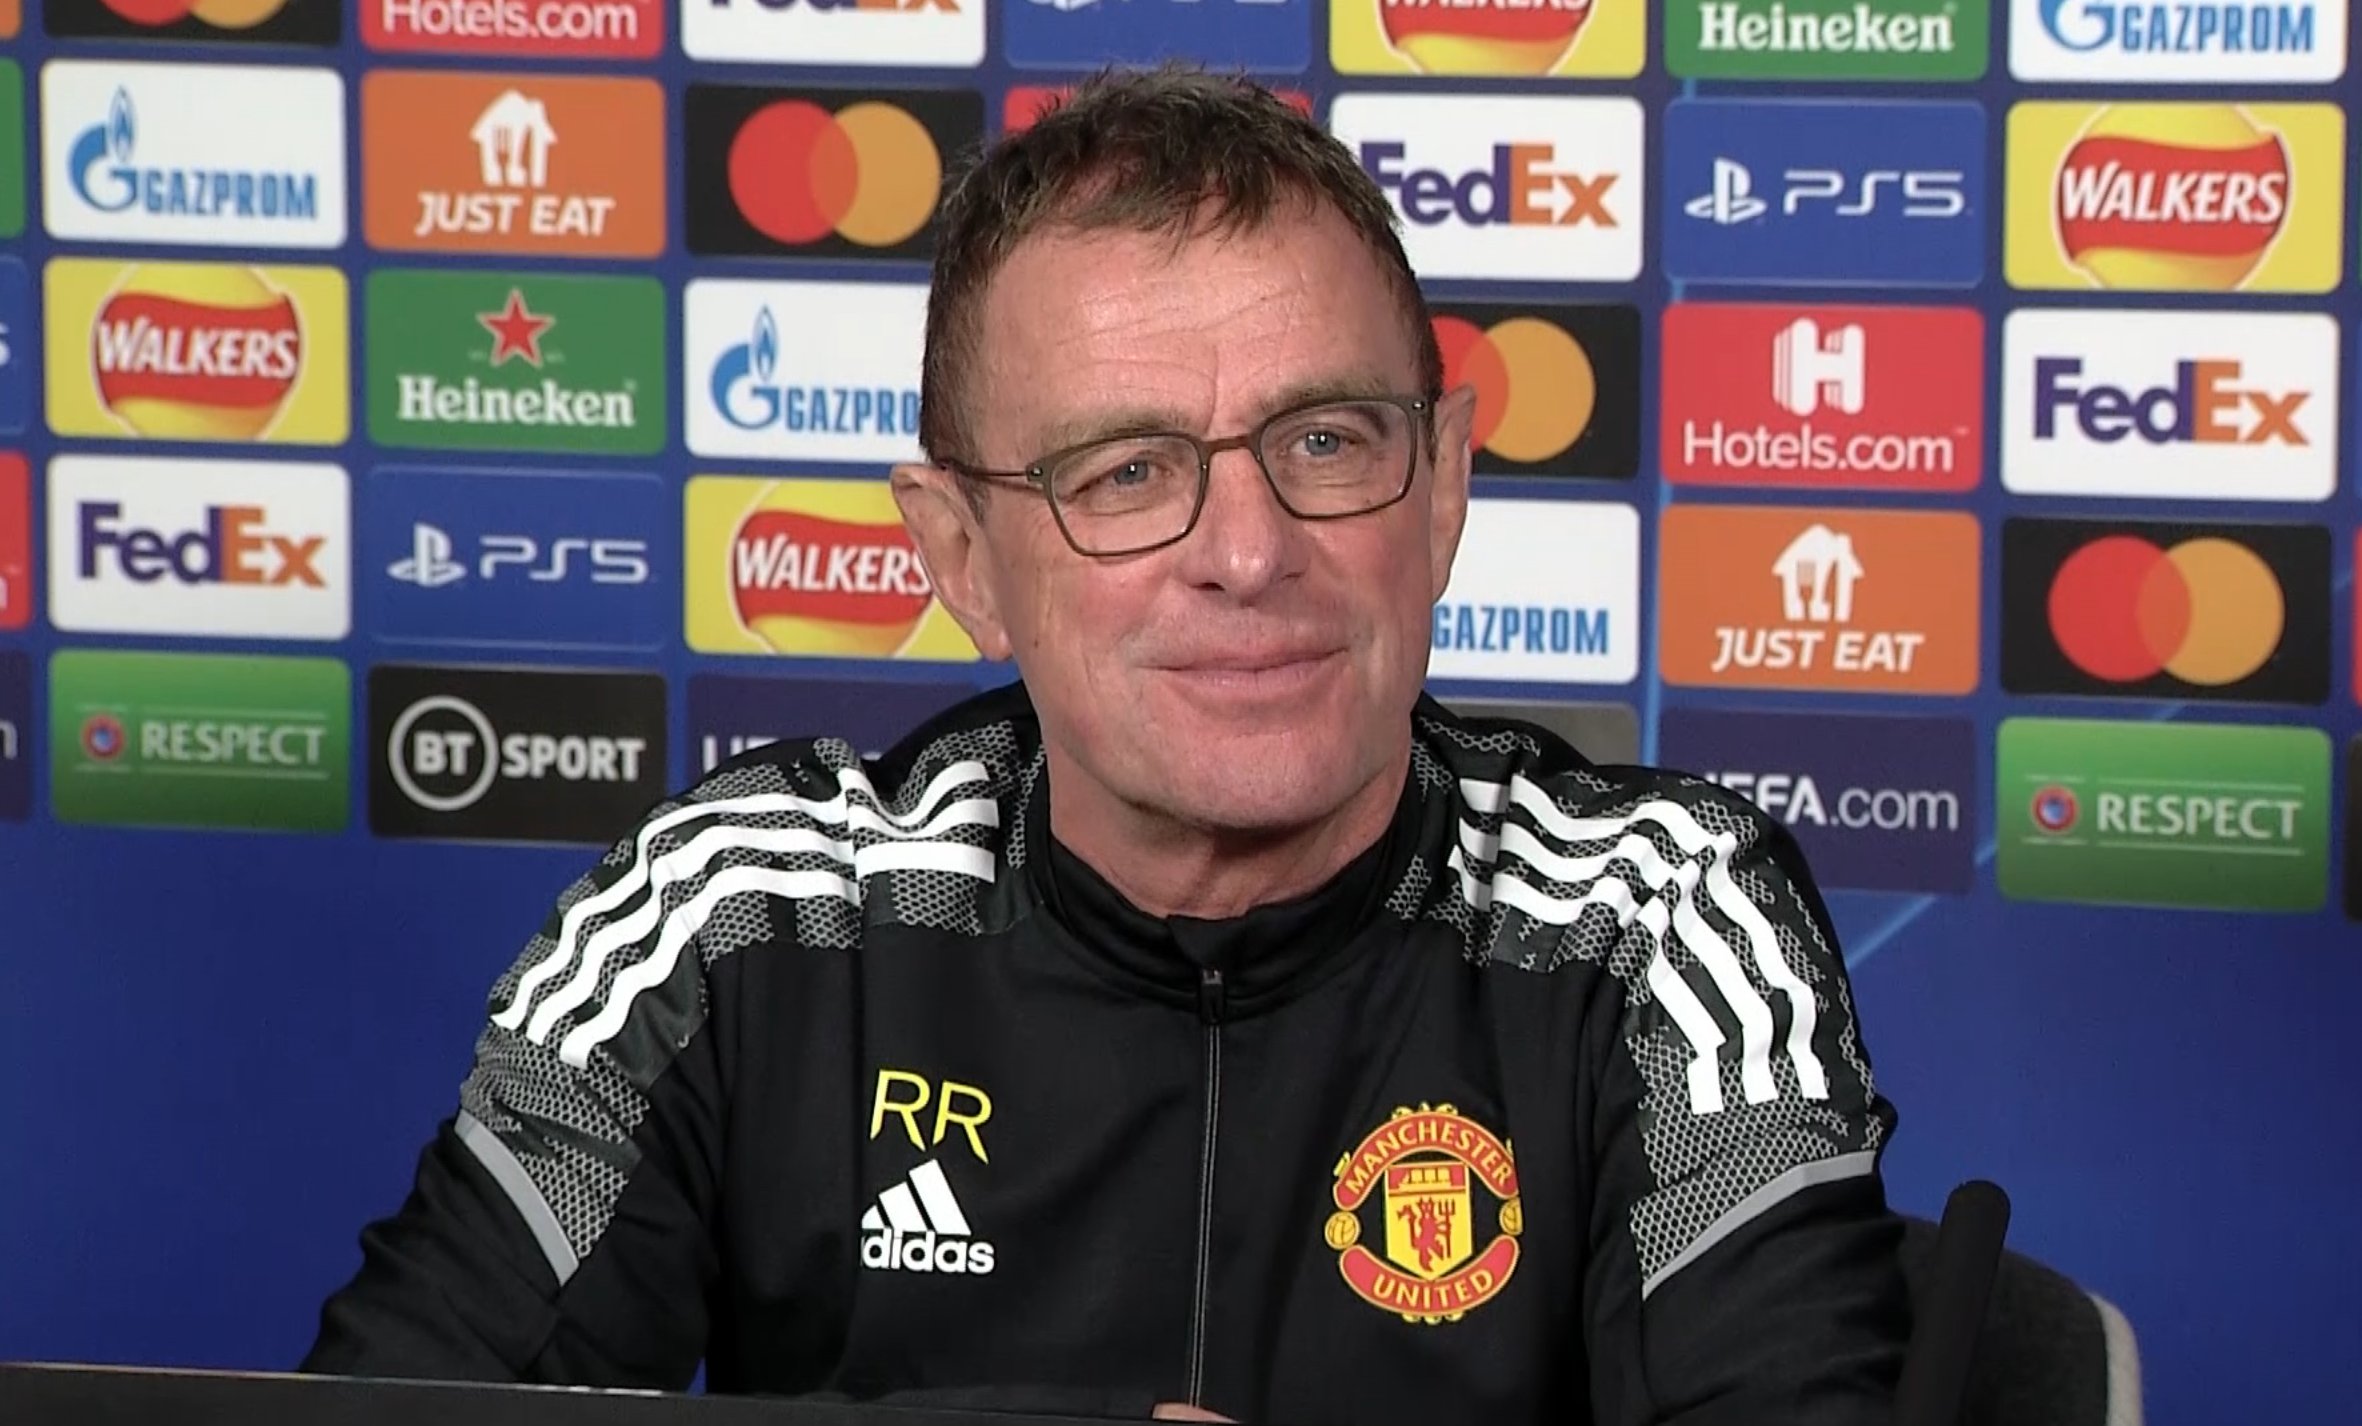 Louis Van Gaal was experienced and could have declined move if he had that opinion, claims Ralf Rangnick